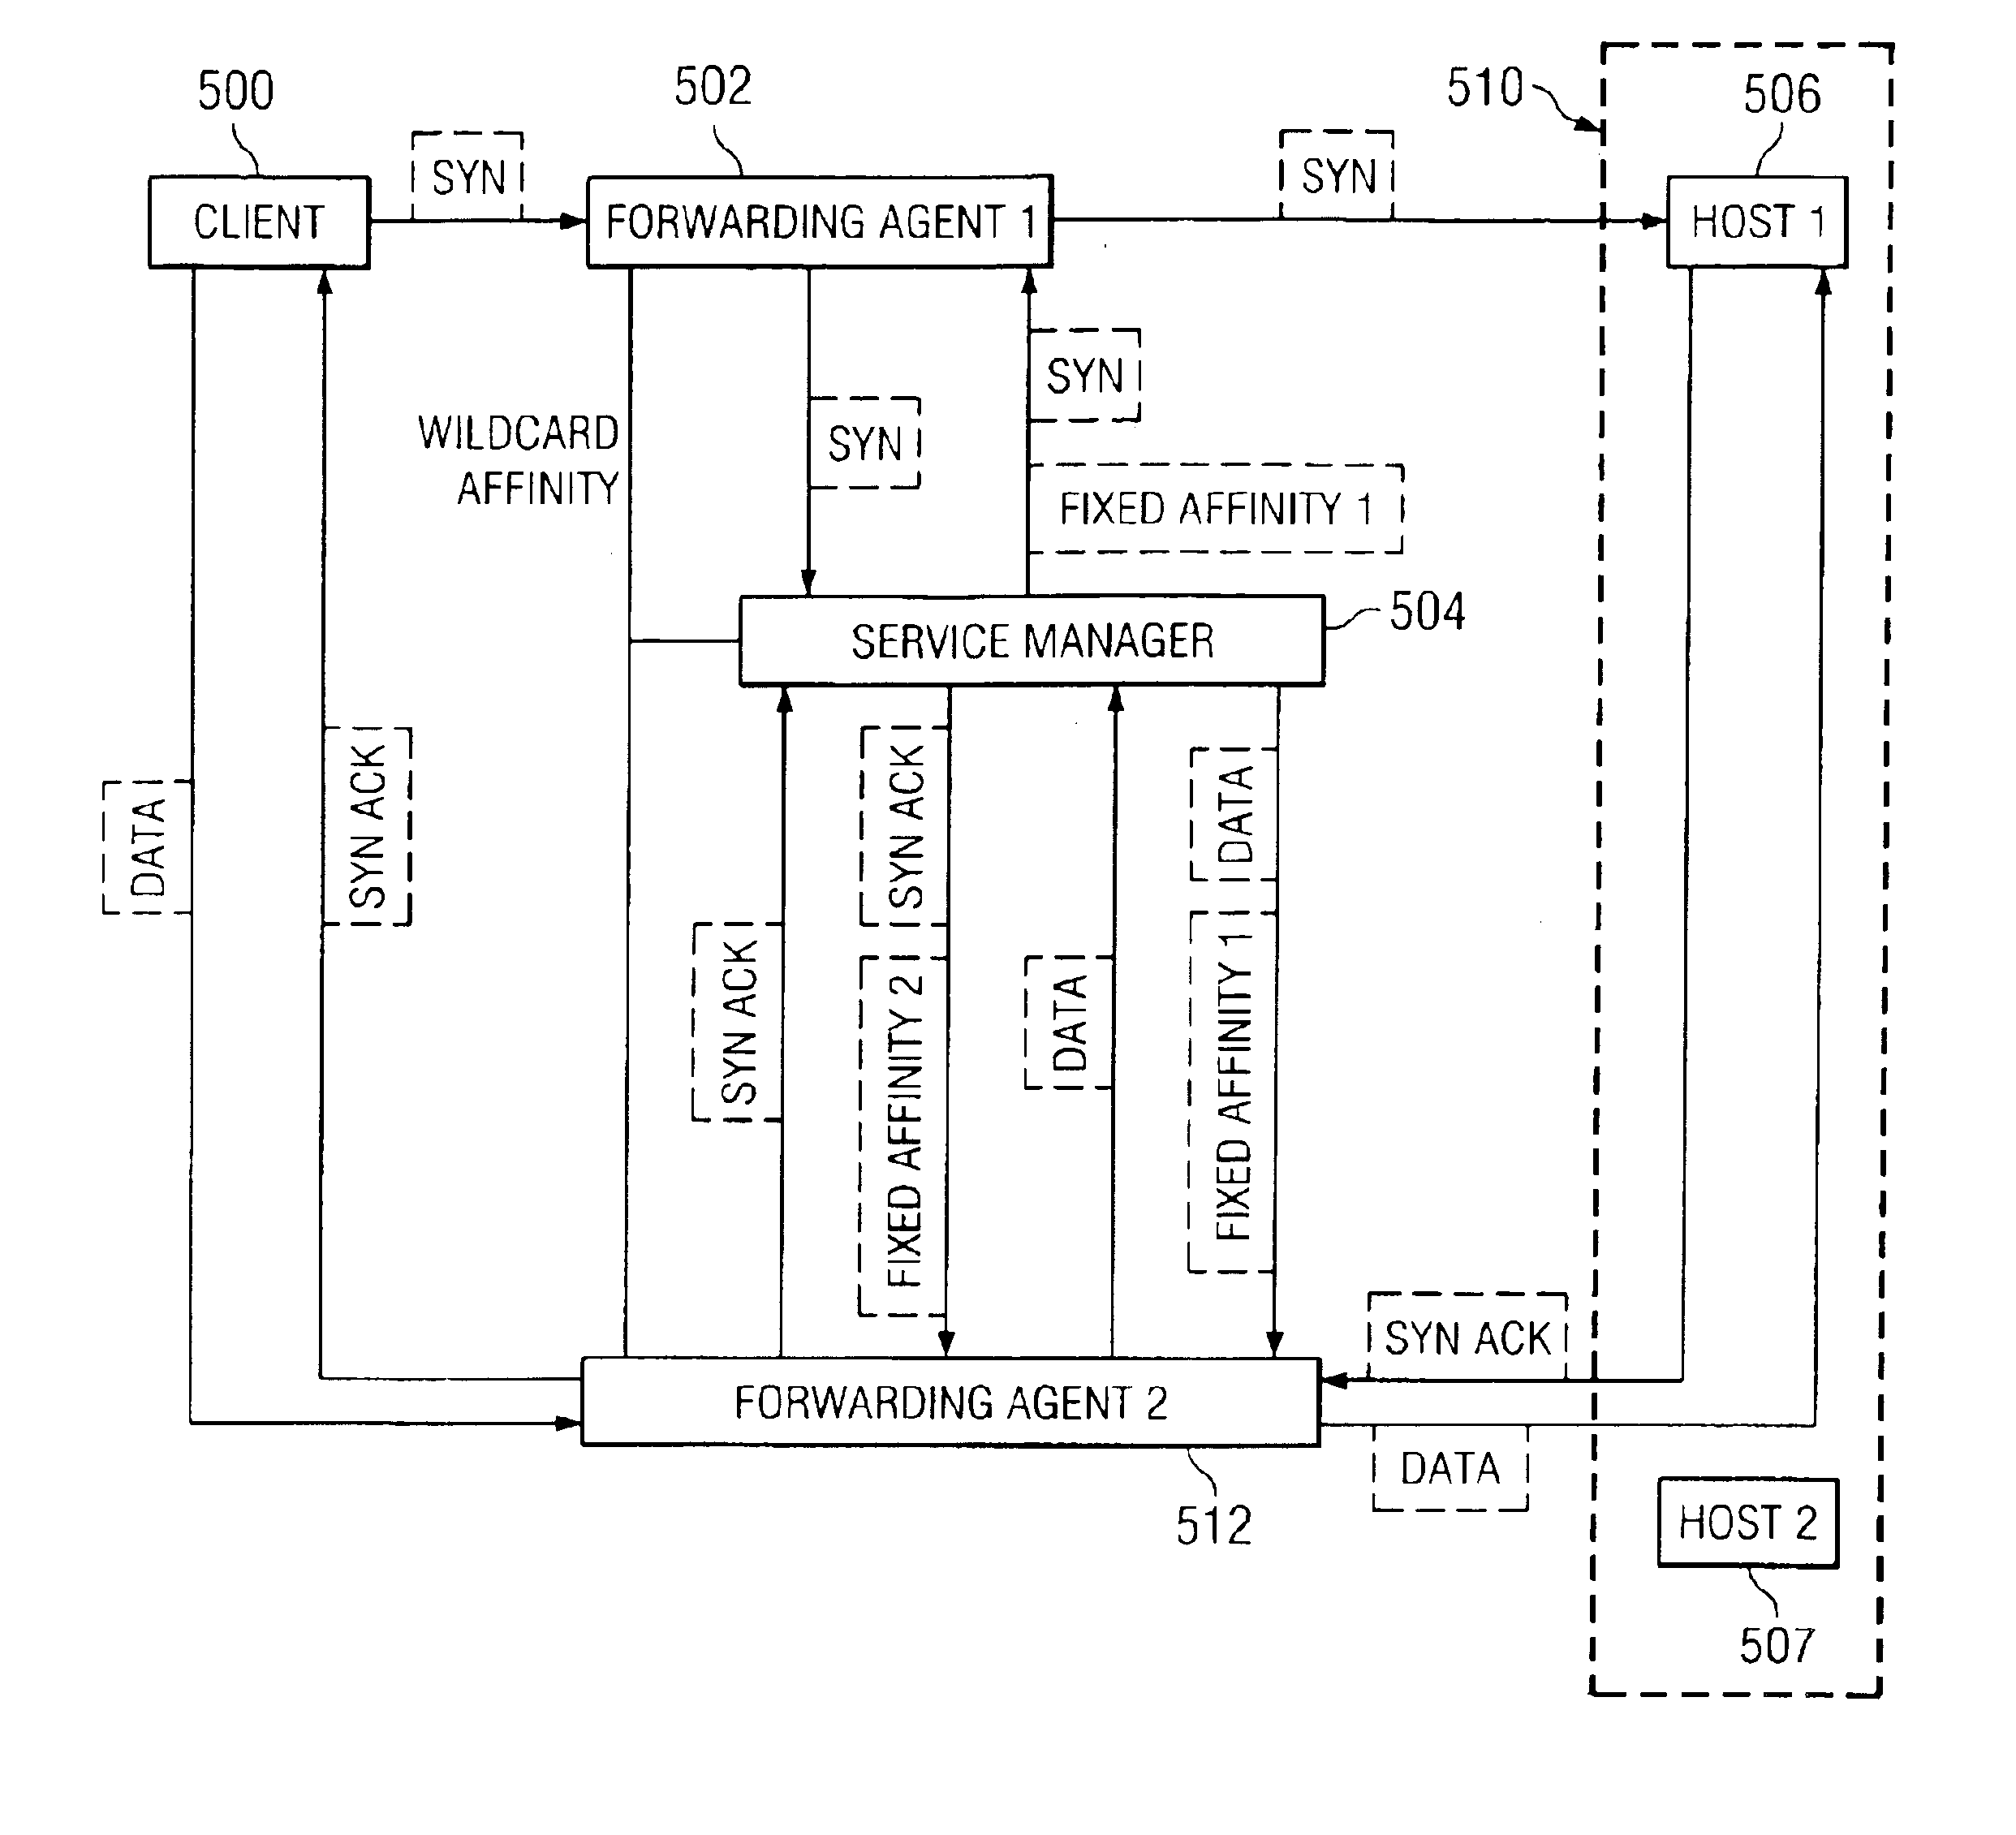 Distributing packets among multiple tiers of network appliances